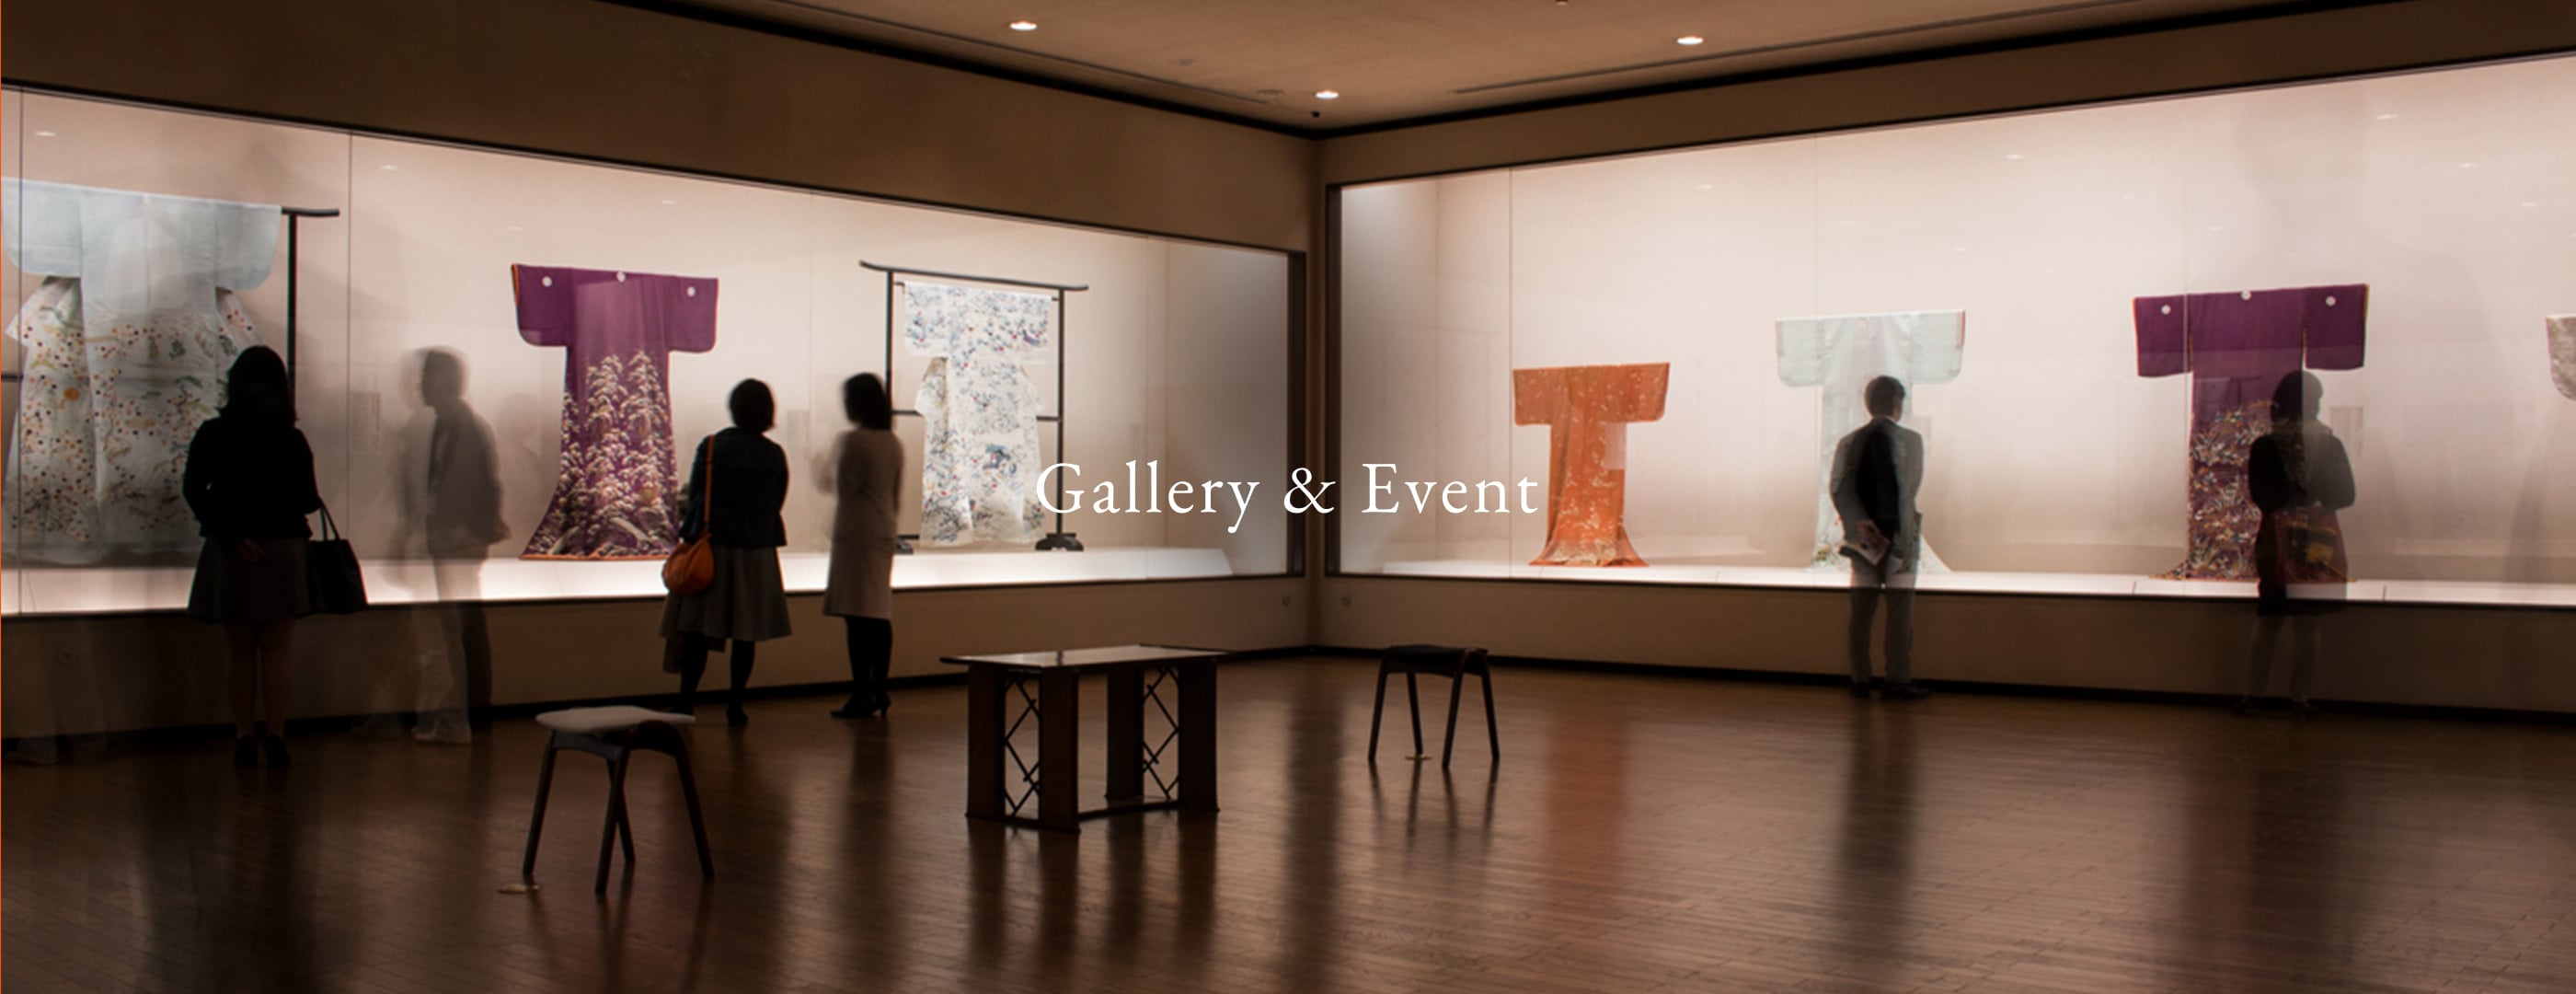 Gallery & Event